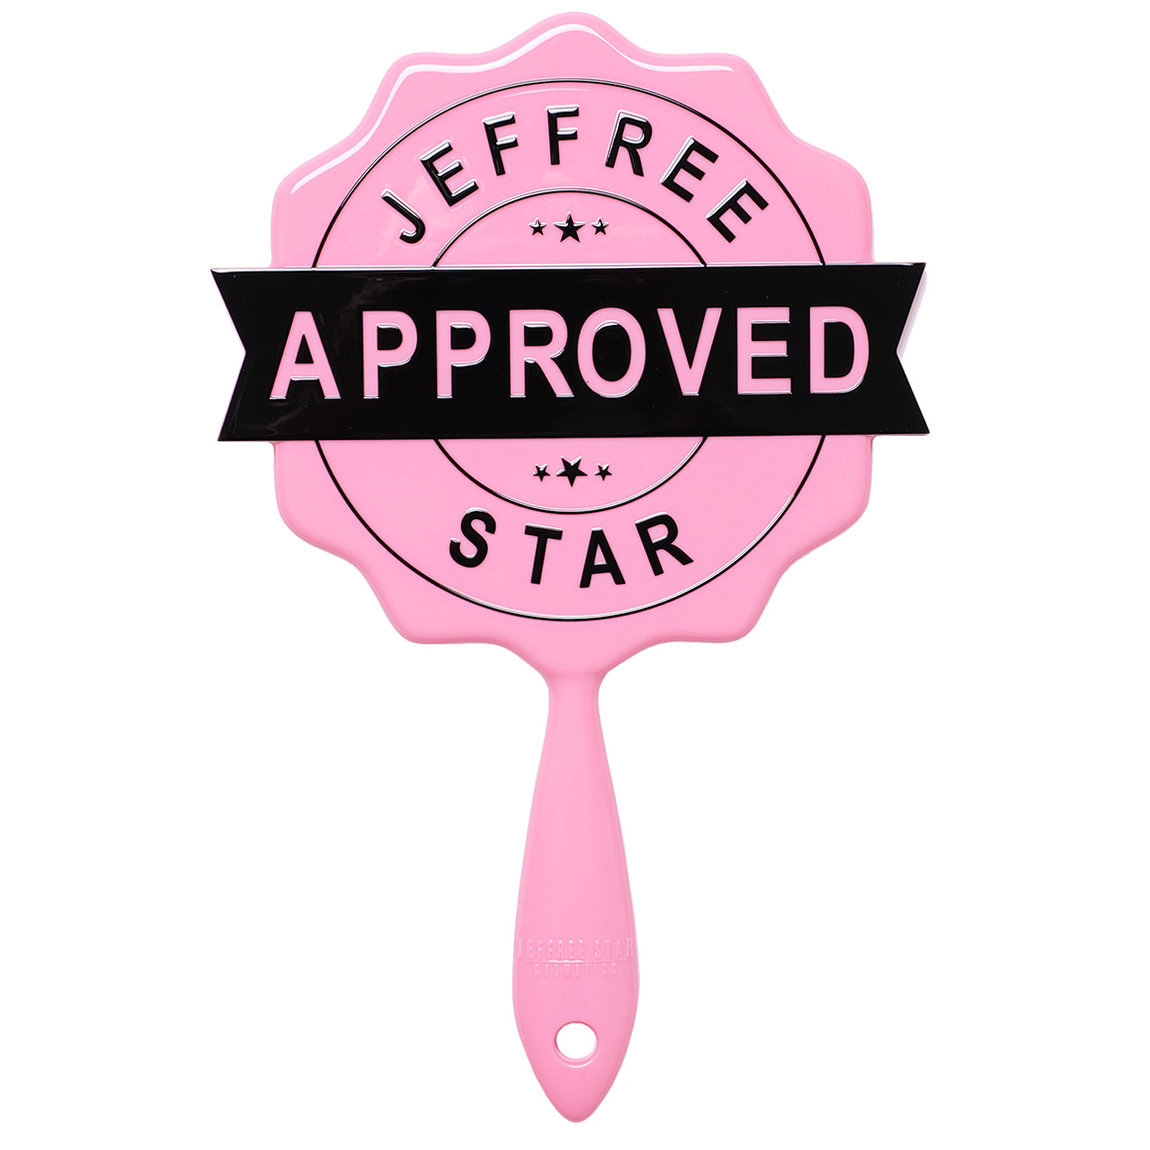 Jeffree Star Cosmetics Approved Stamp Mirror alternative view 1 - product swatch.